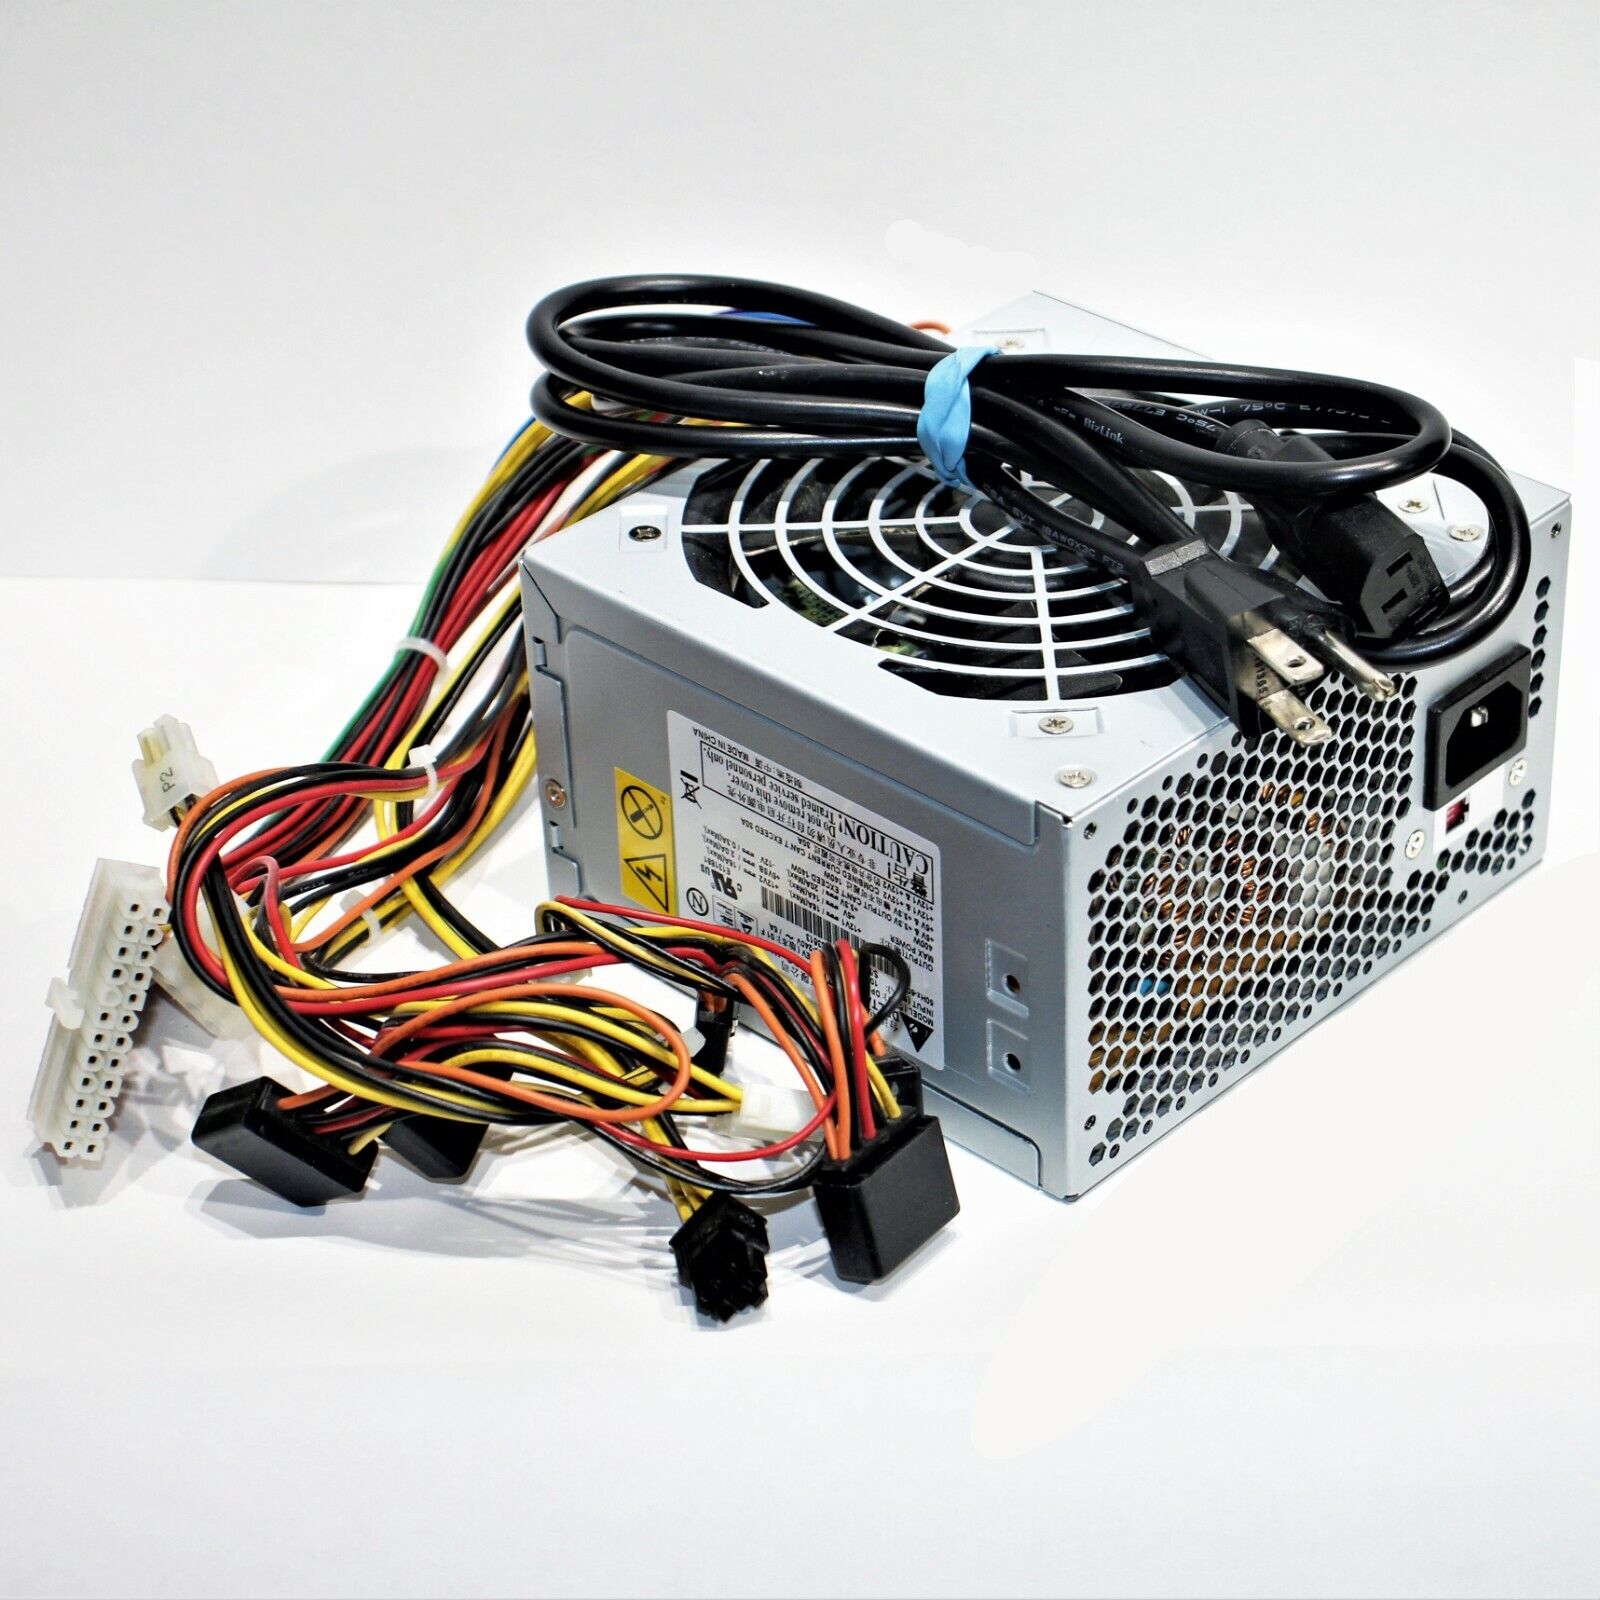 Delta Electronics DPS-400RB Server Power Supply 400W, DPS-400RB A Preowned